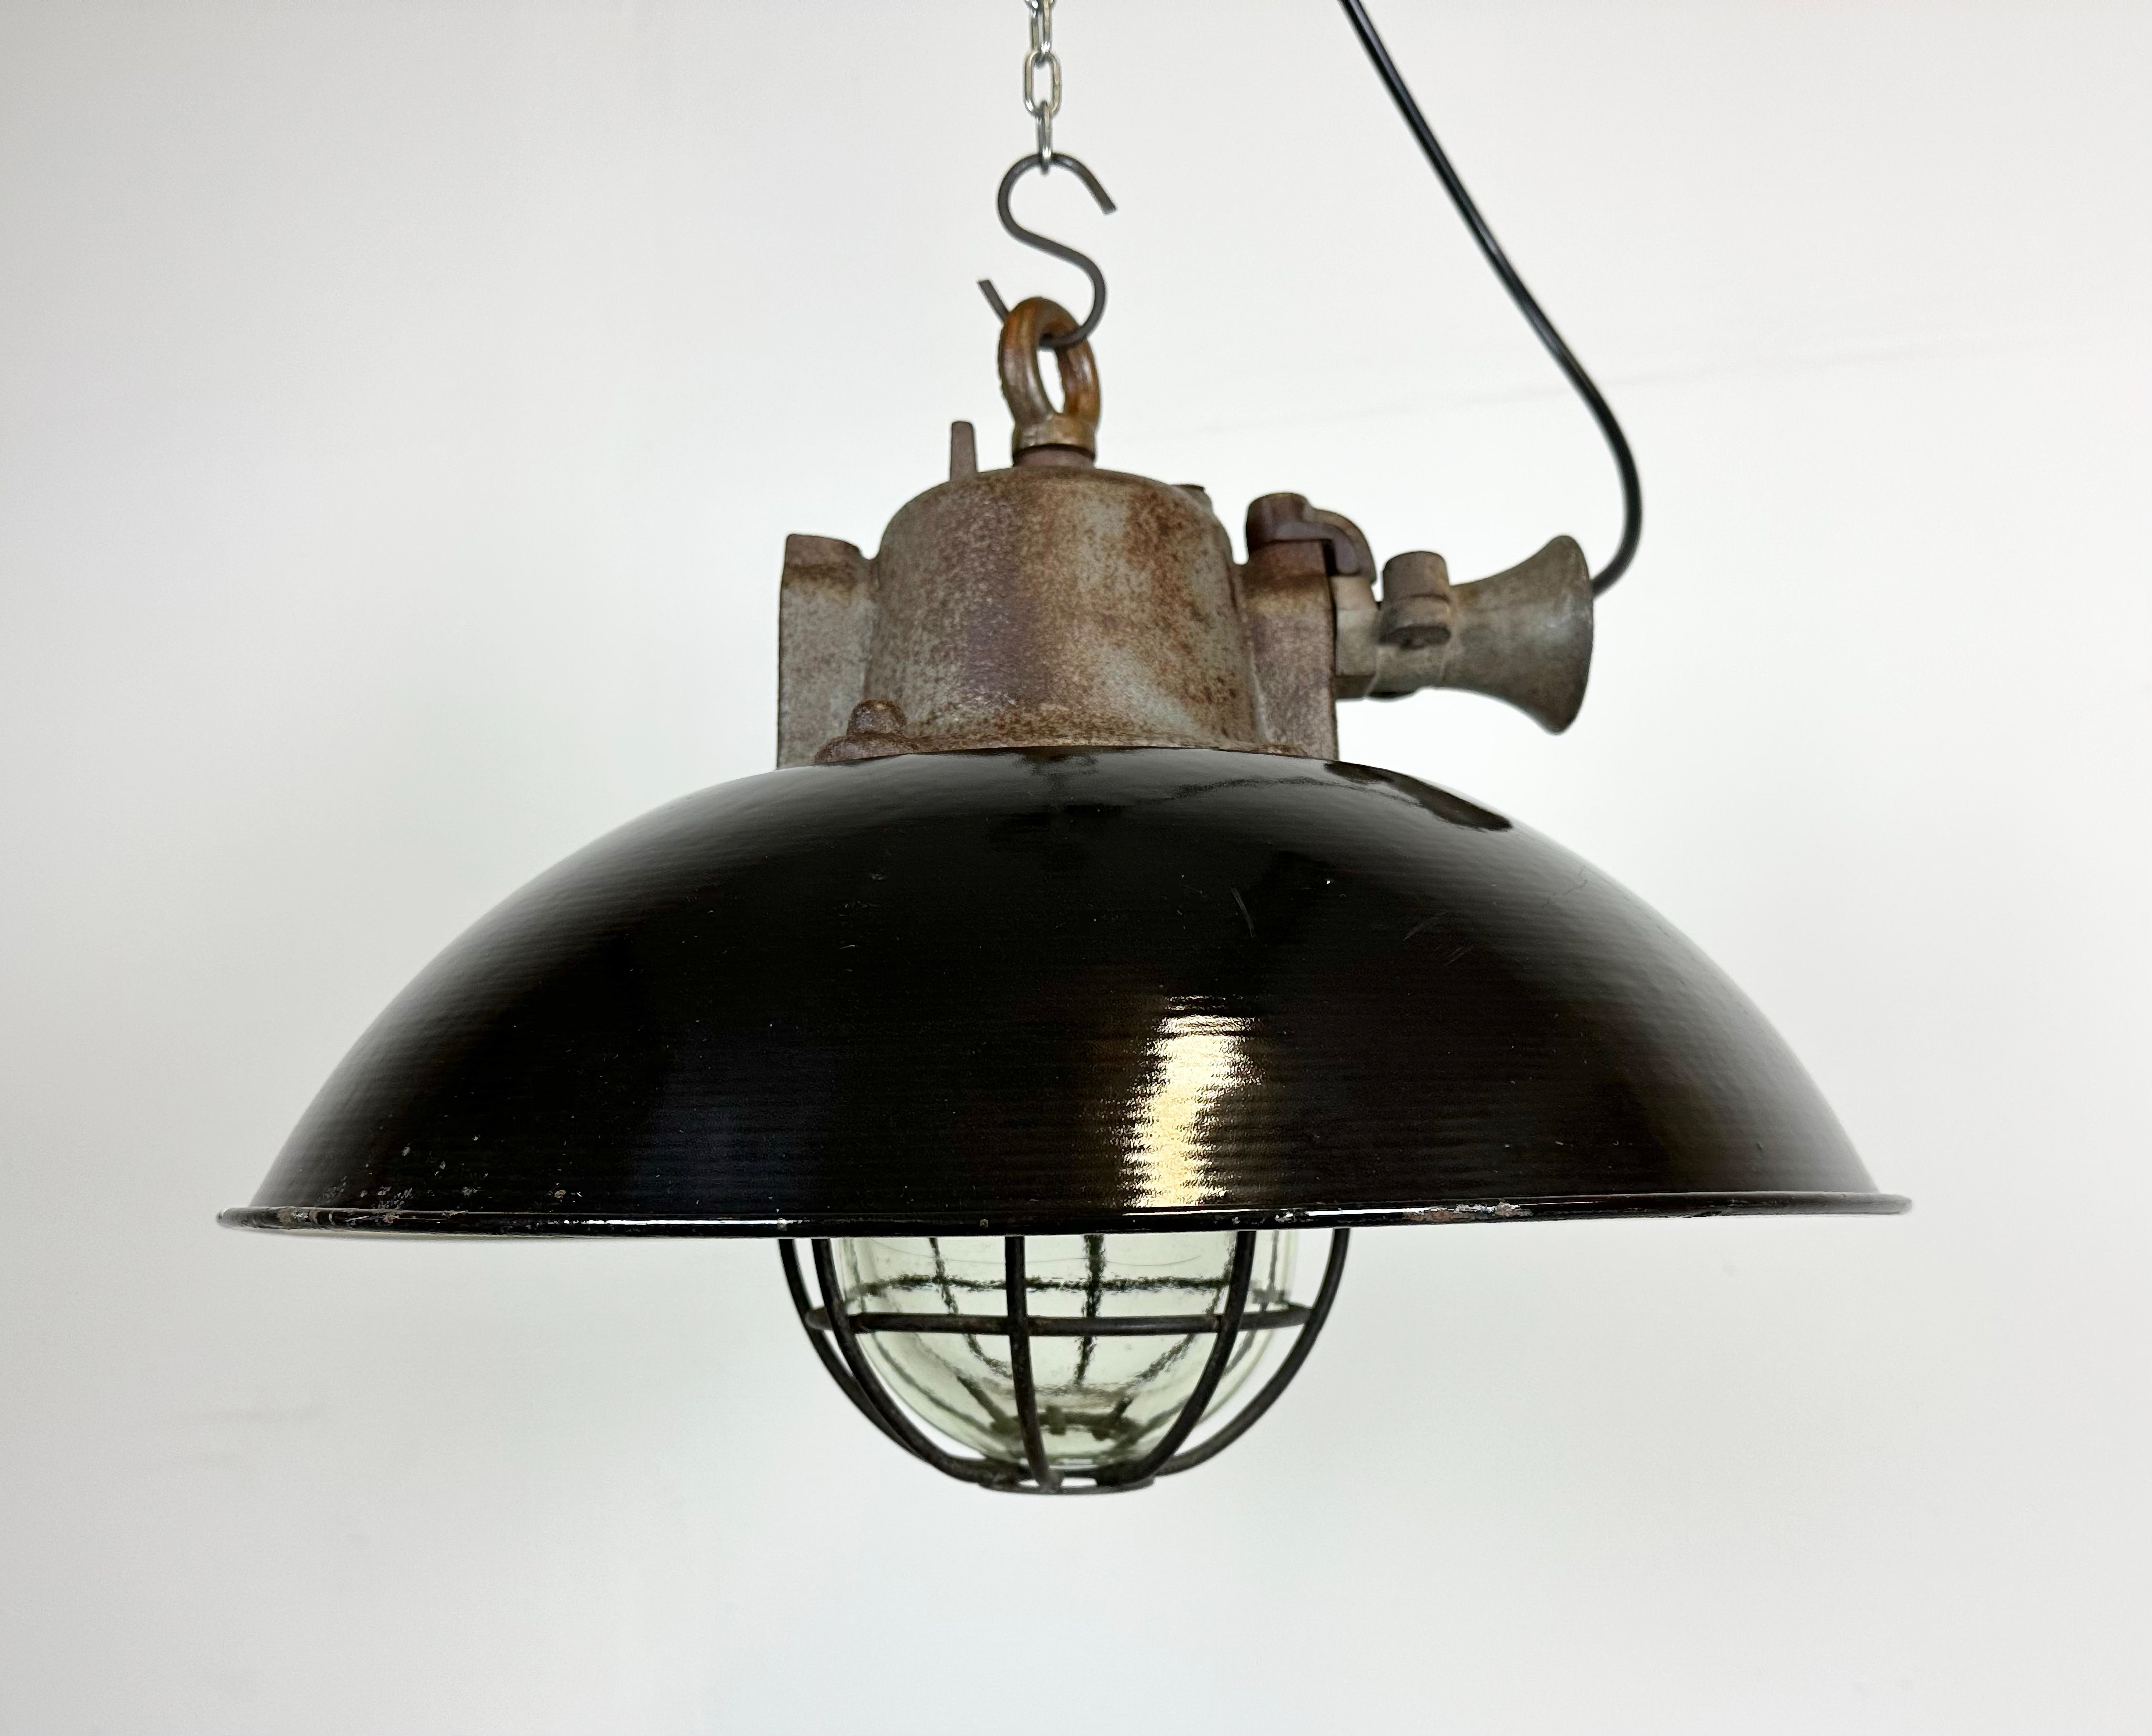 Industrial hanging lamp manufactured in former Czechoslovakia during the 1950s. It features a black enamel shade, with white enamel interior, a cast iron top, a clear glass cover and an iron grid.The porcelain socket requires E 27/E26 light